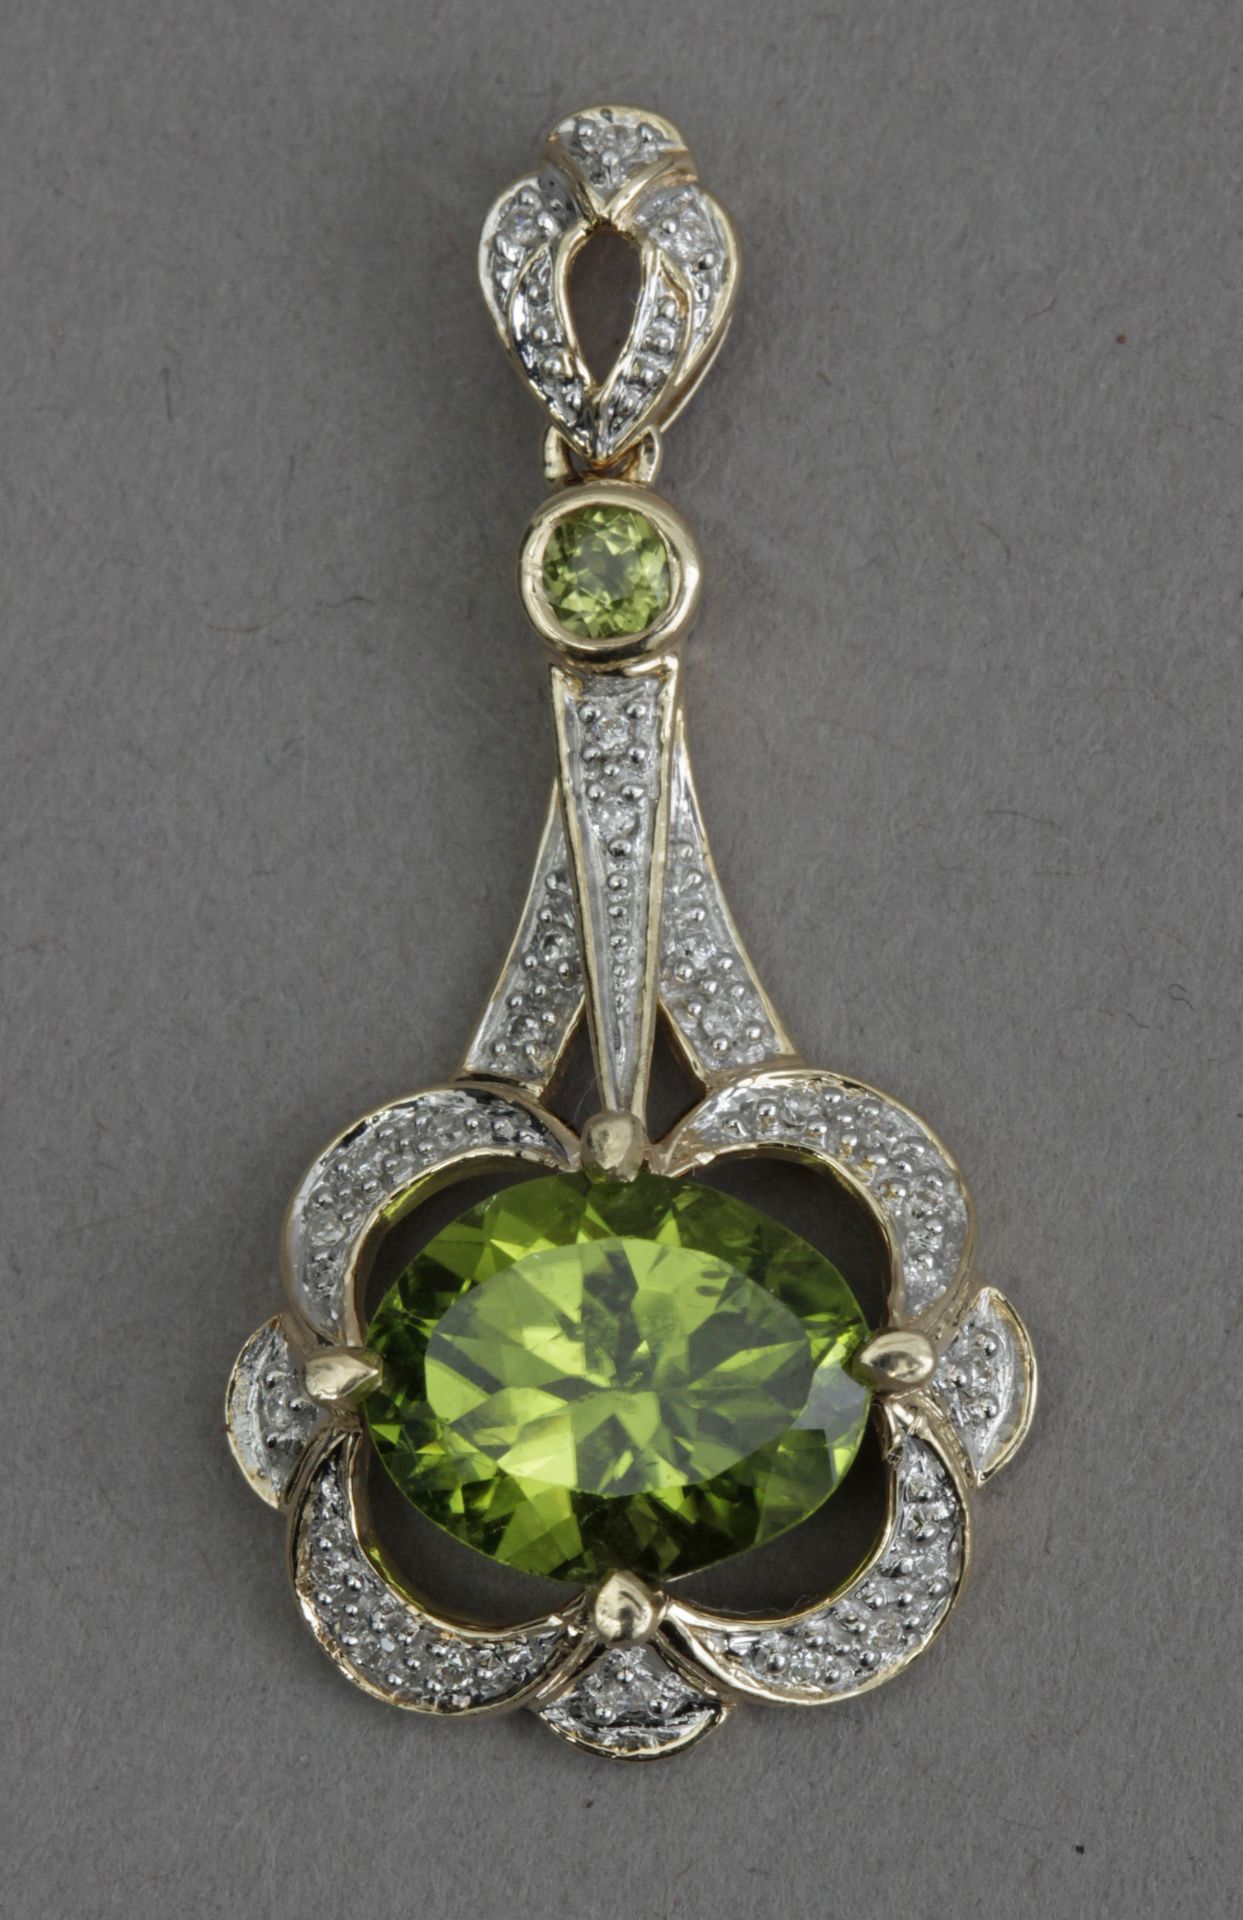 A diamond and diopside pendant in an 18k. yellow gold setting